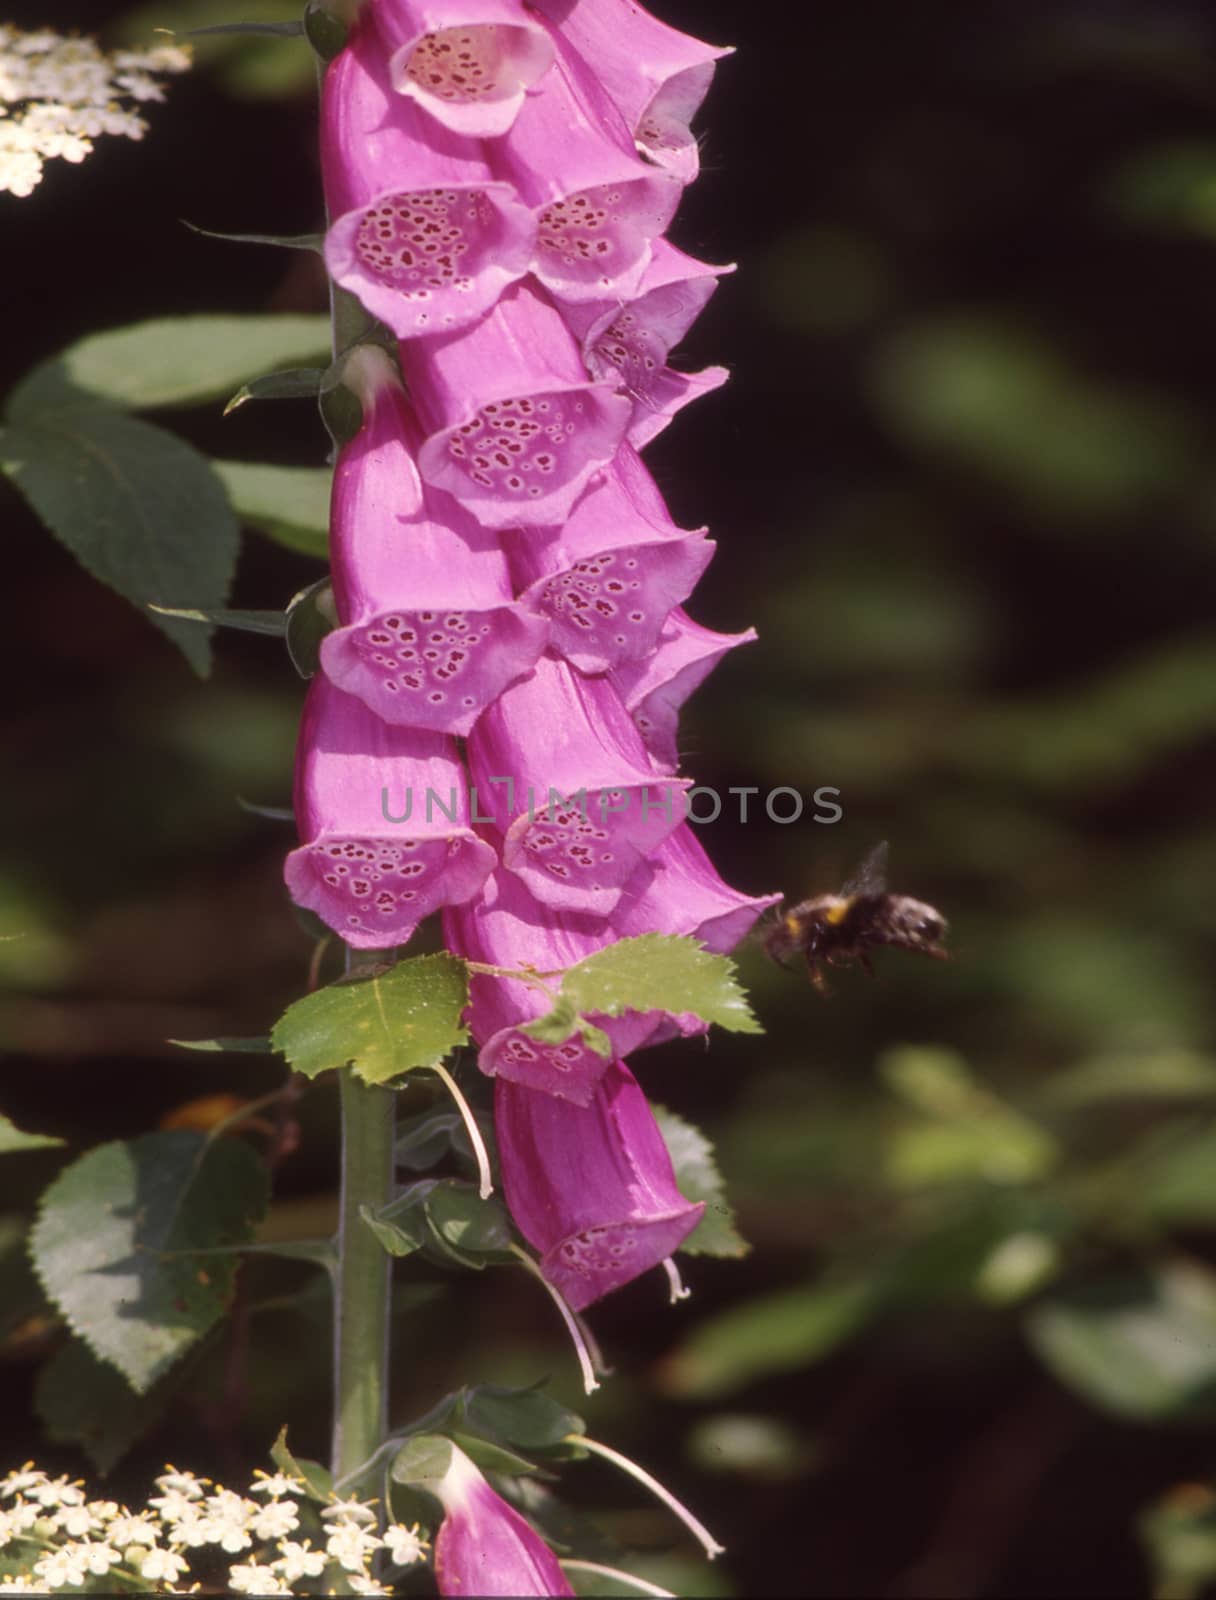 red foxglove flowers are visited by Hummel